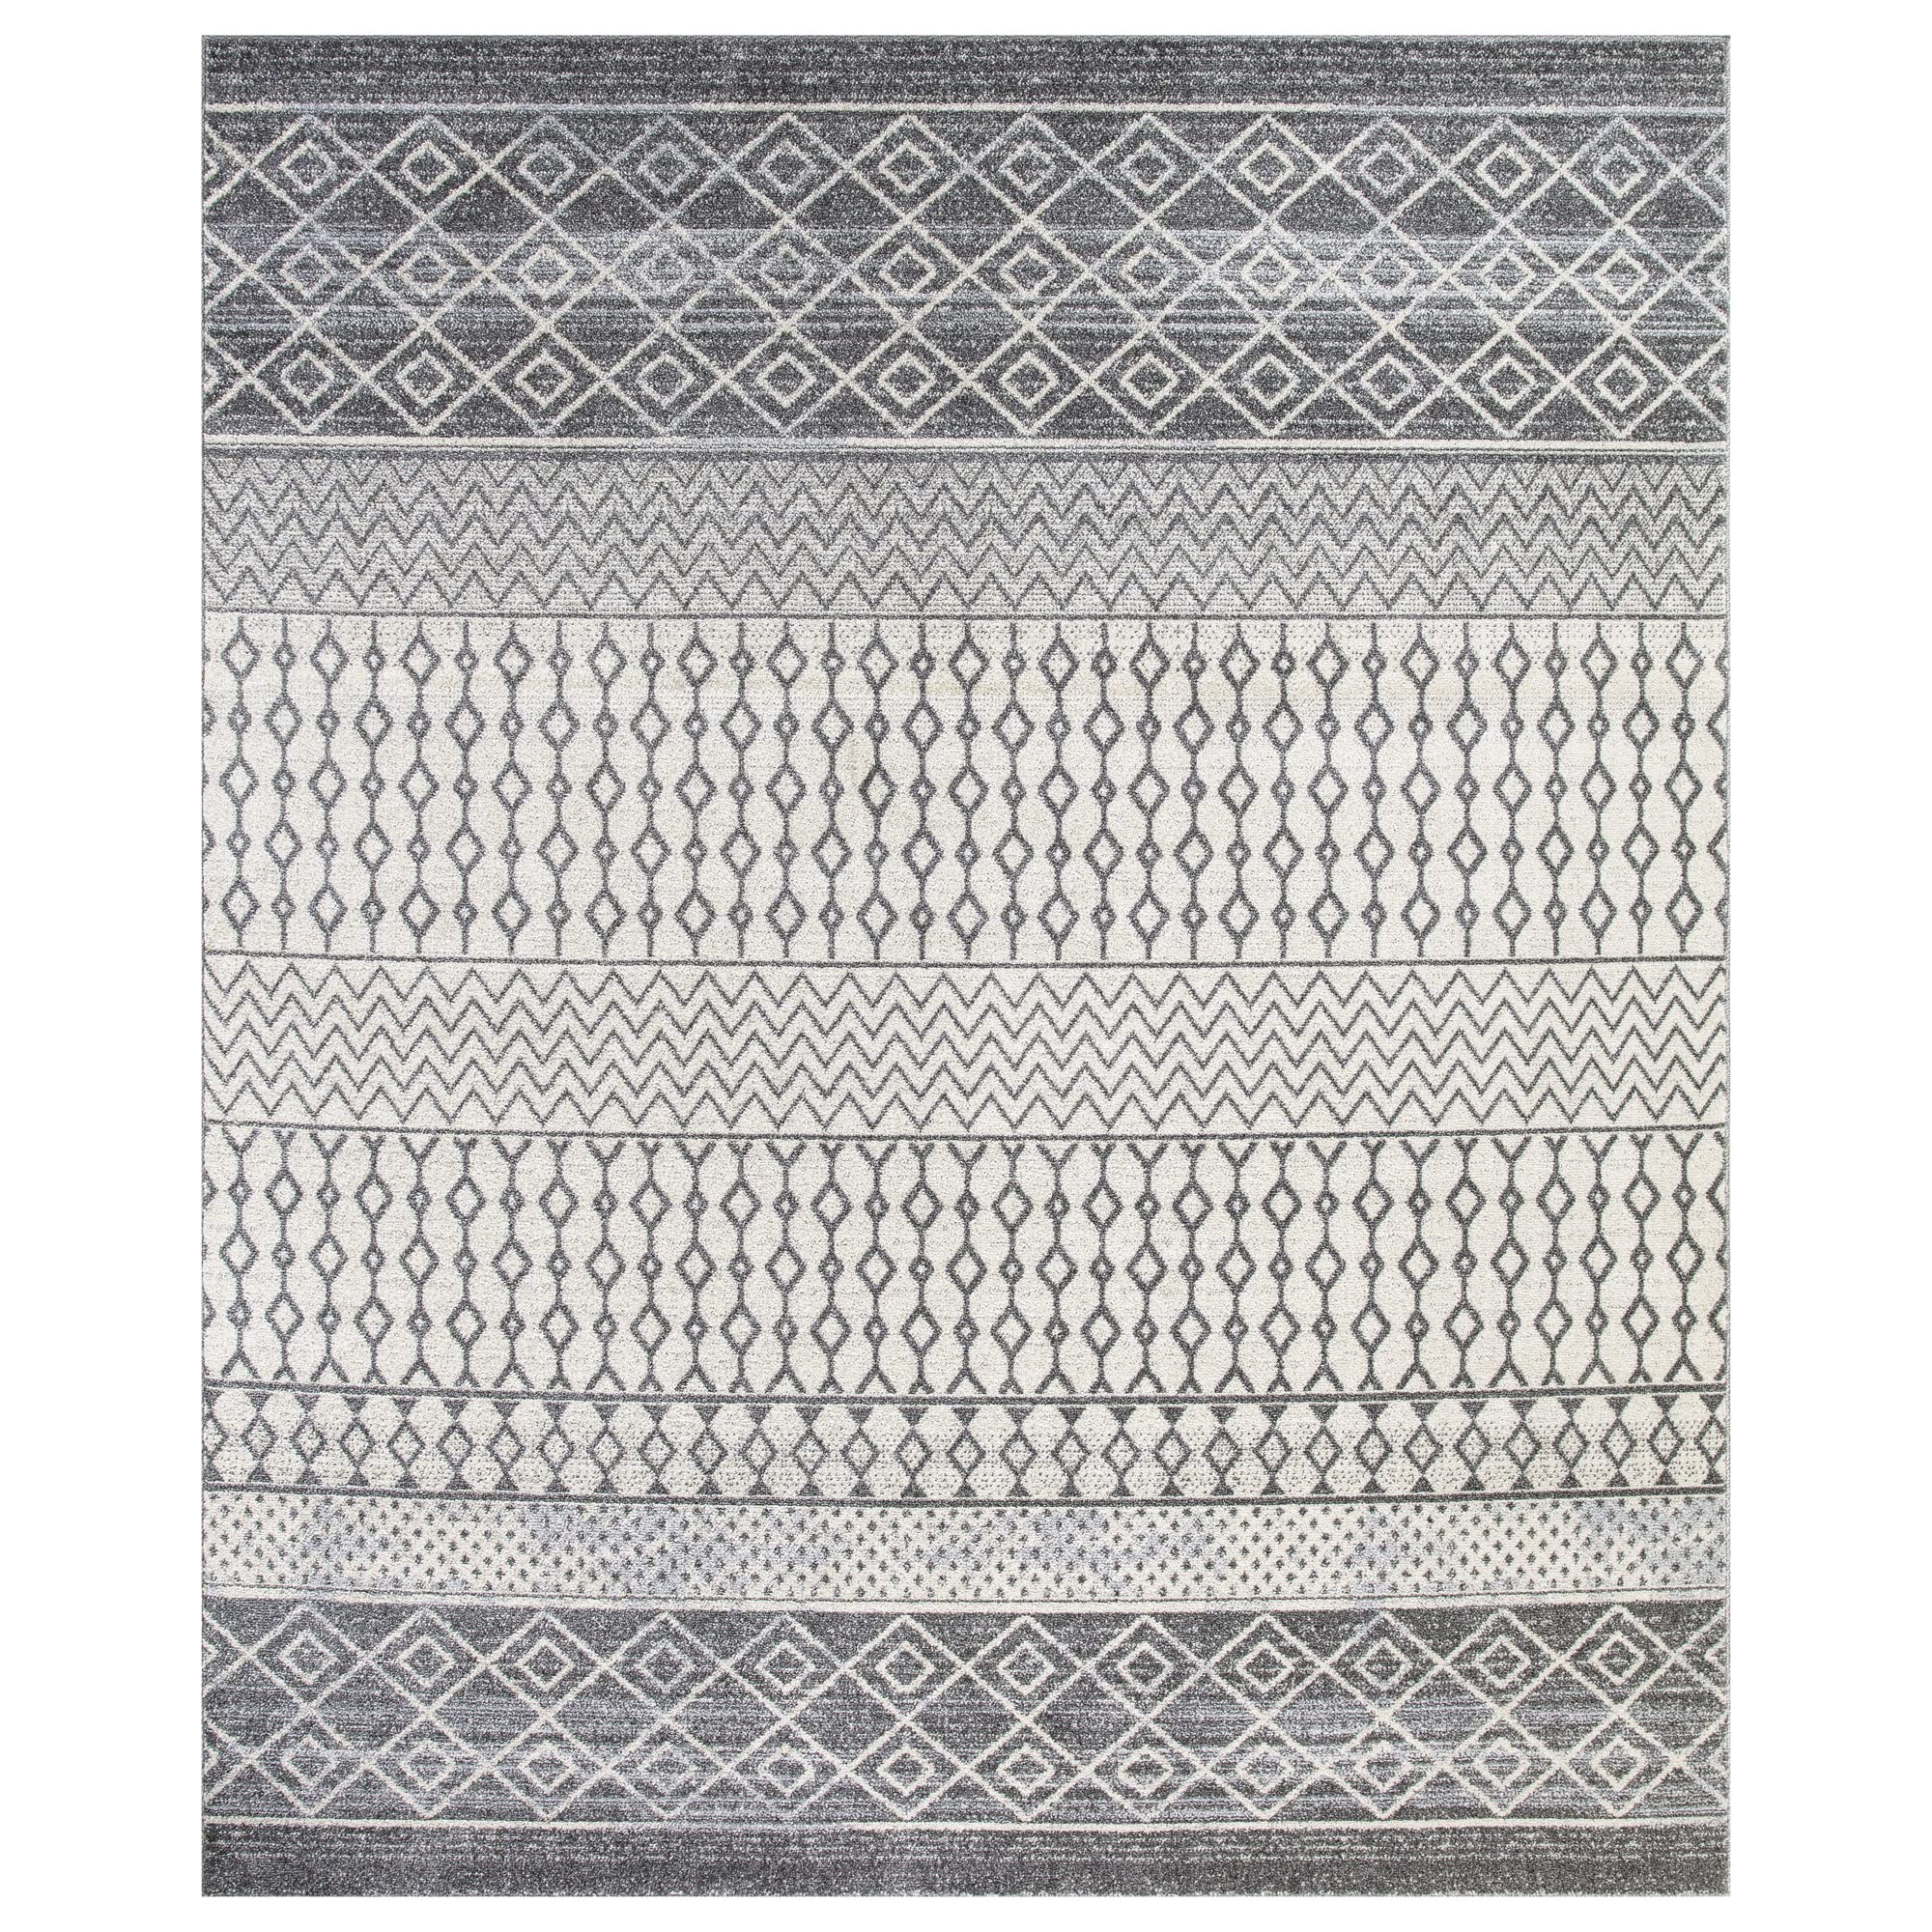 Signature Loom Olivia Moroccan Boho Area Rugs for Living Room or Area Rug Carpet for Bedroom Rug  - Acceptable